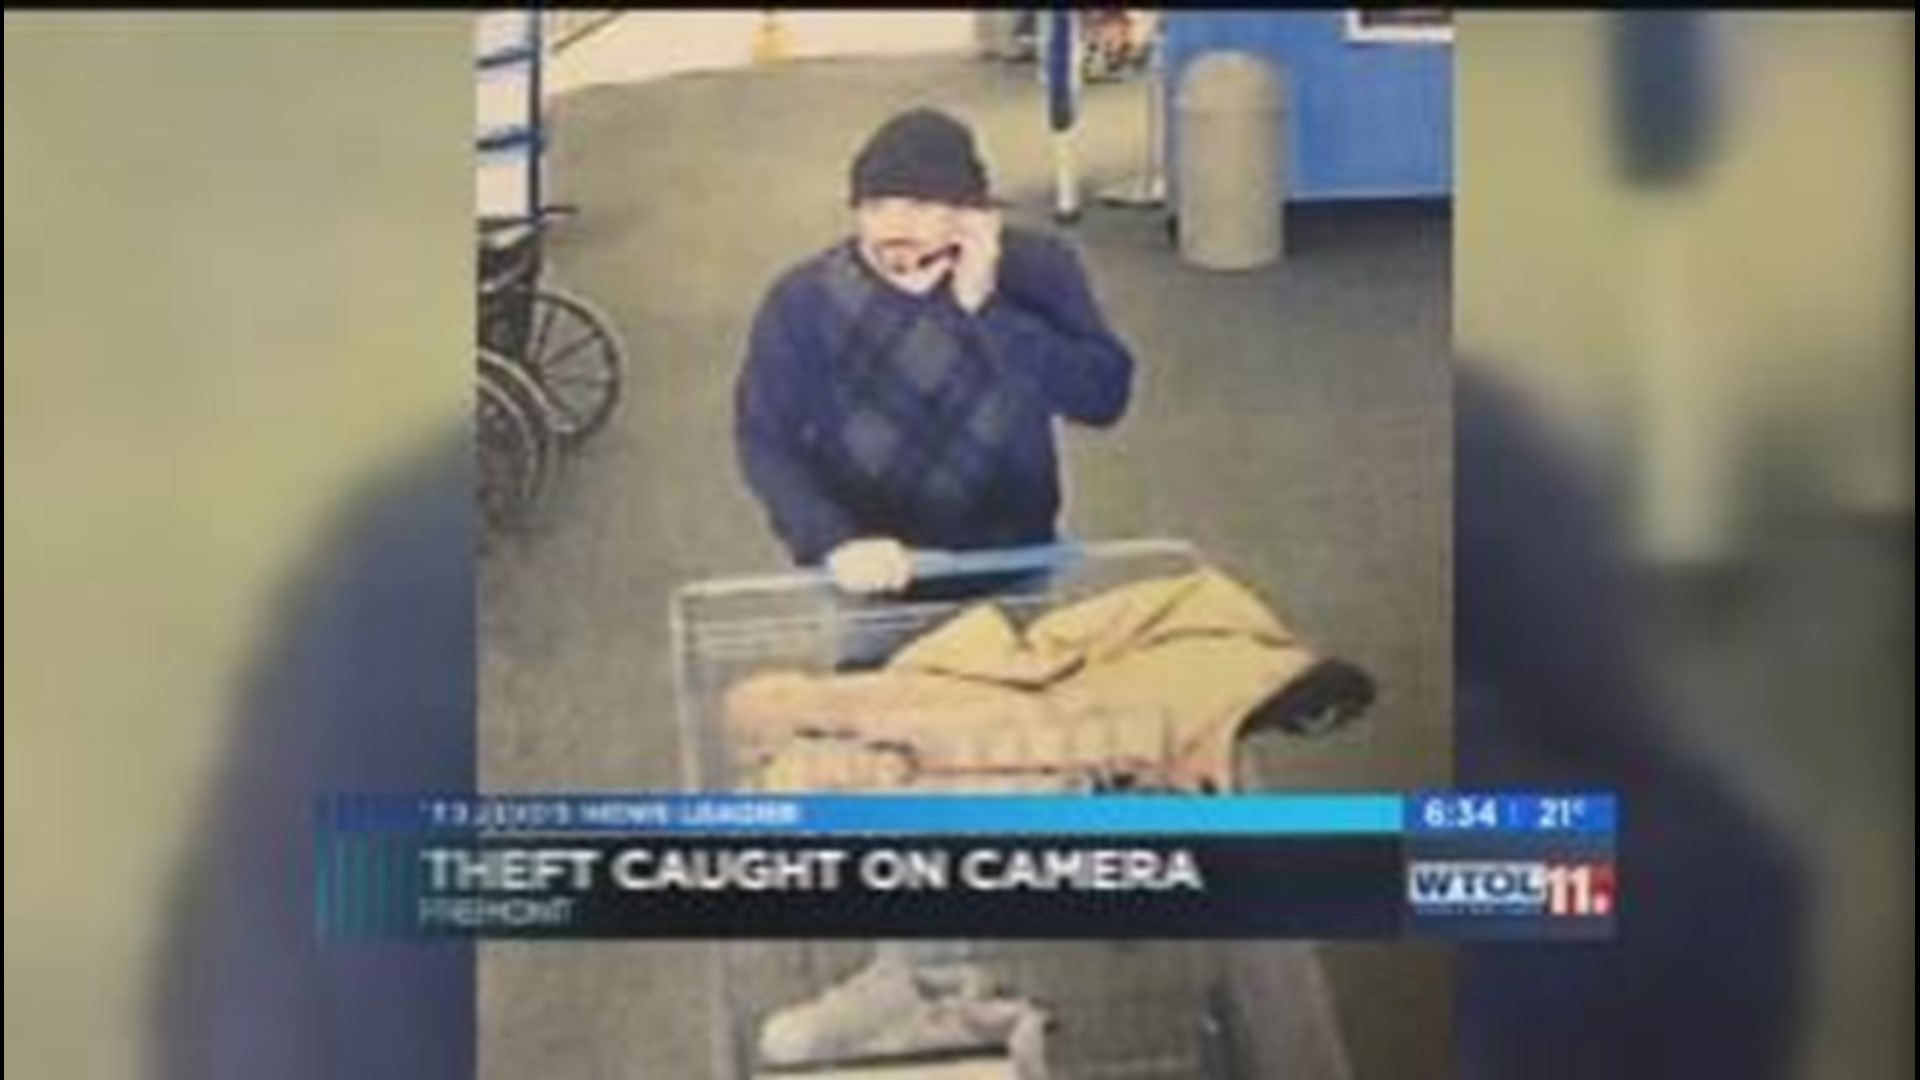 Fremont police need help catching Wal-Mart thief